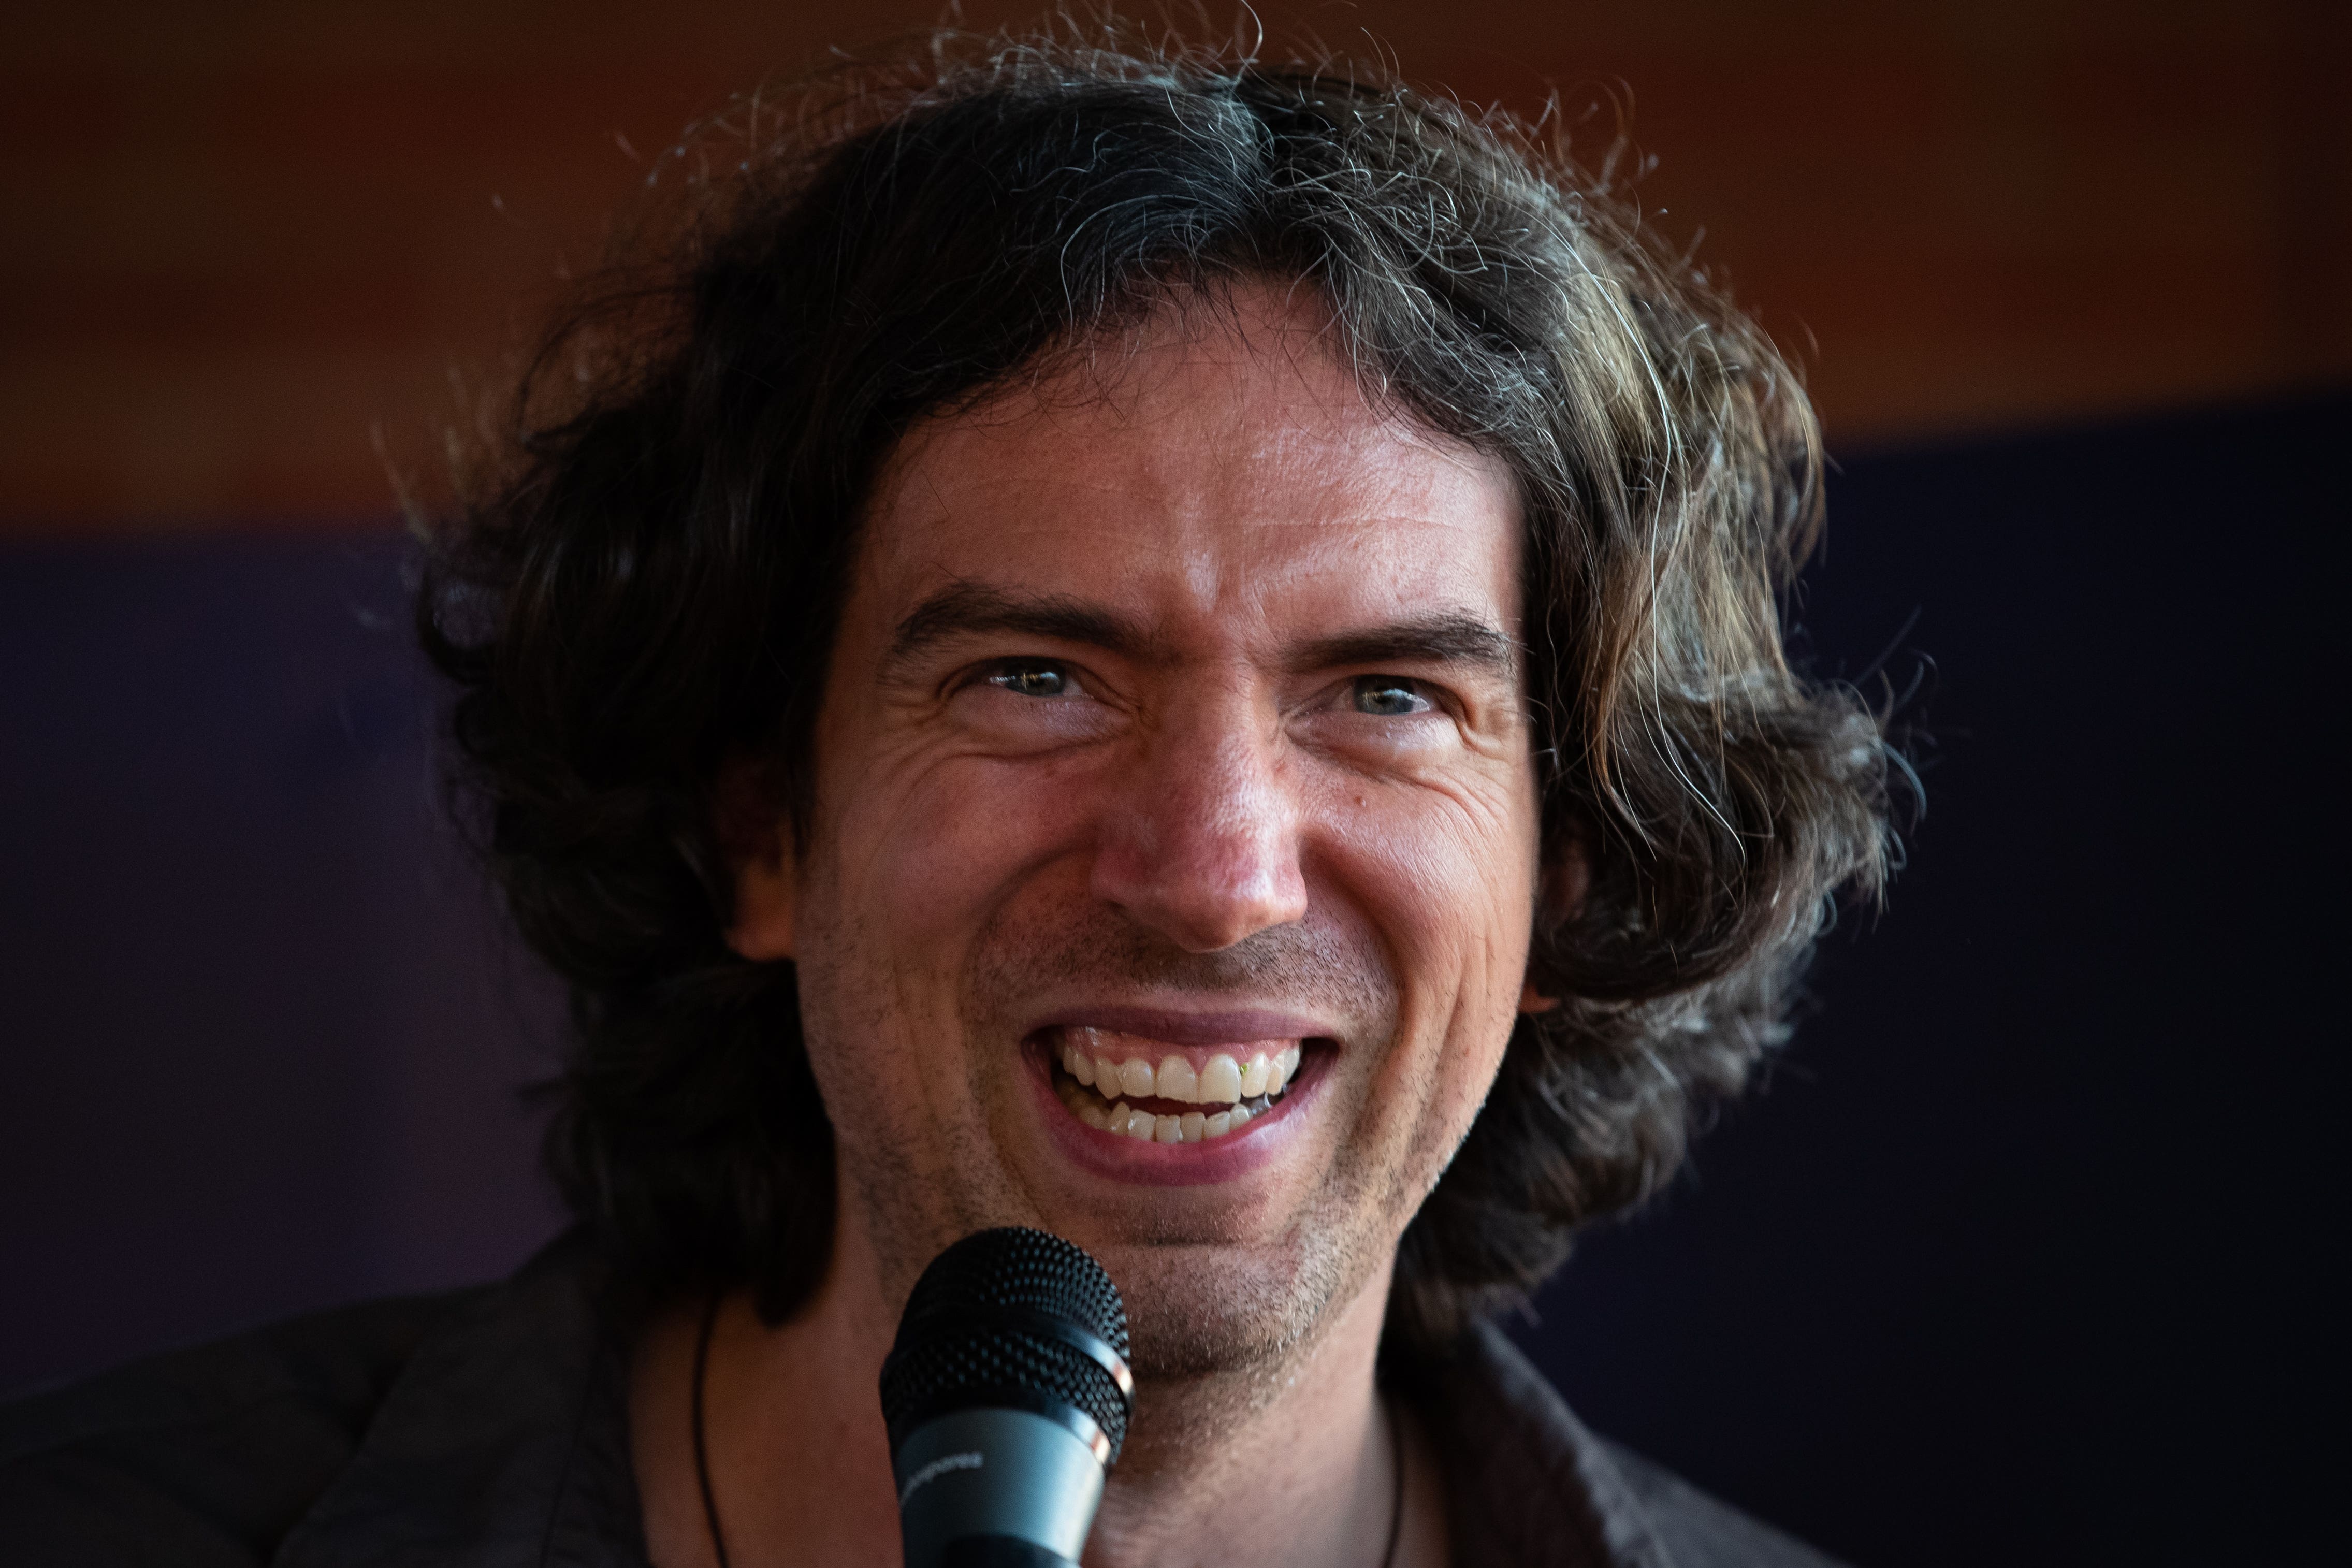 Snow Patrol frontman Gary Lightbody previously announced plans for a new album in 2024 following a major change for the band with the departure of members Jonny Quinn and Paul Wilson (Aaron Chown/PA)